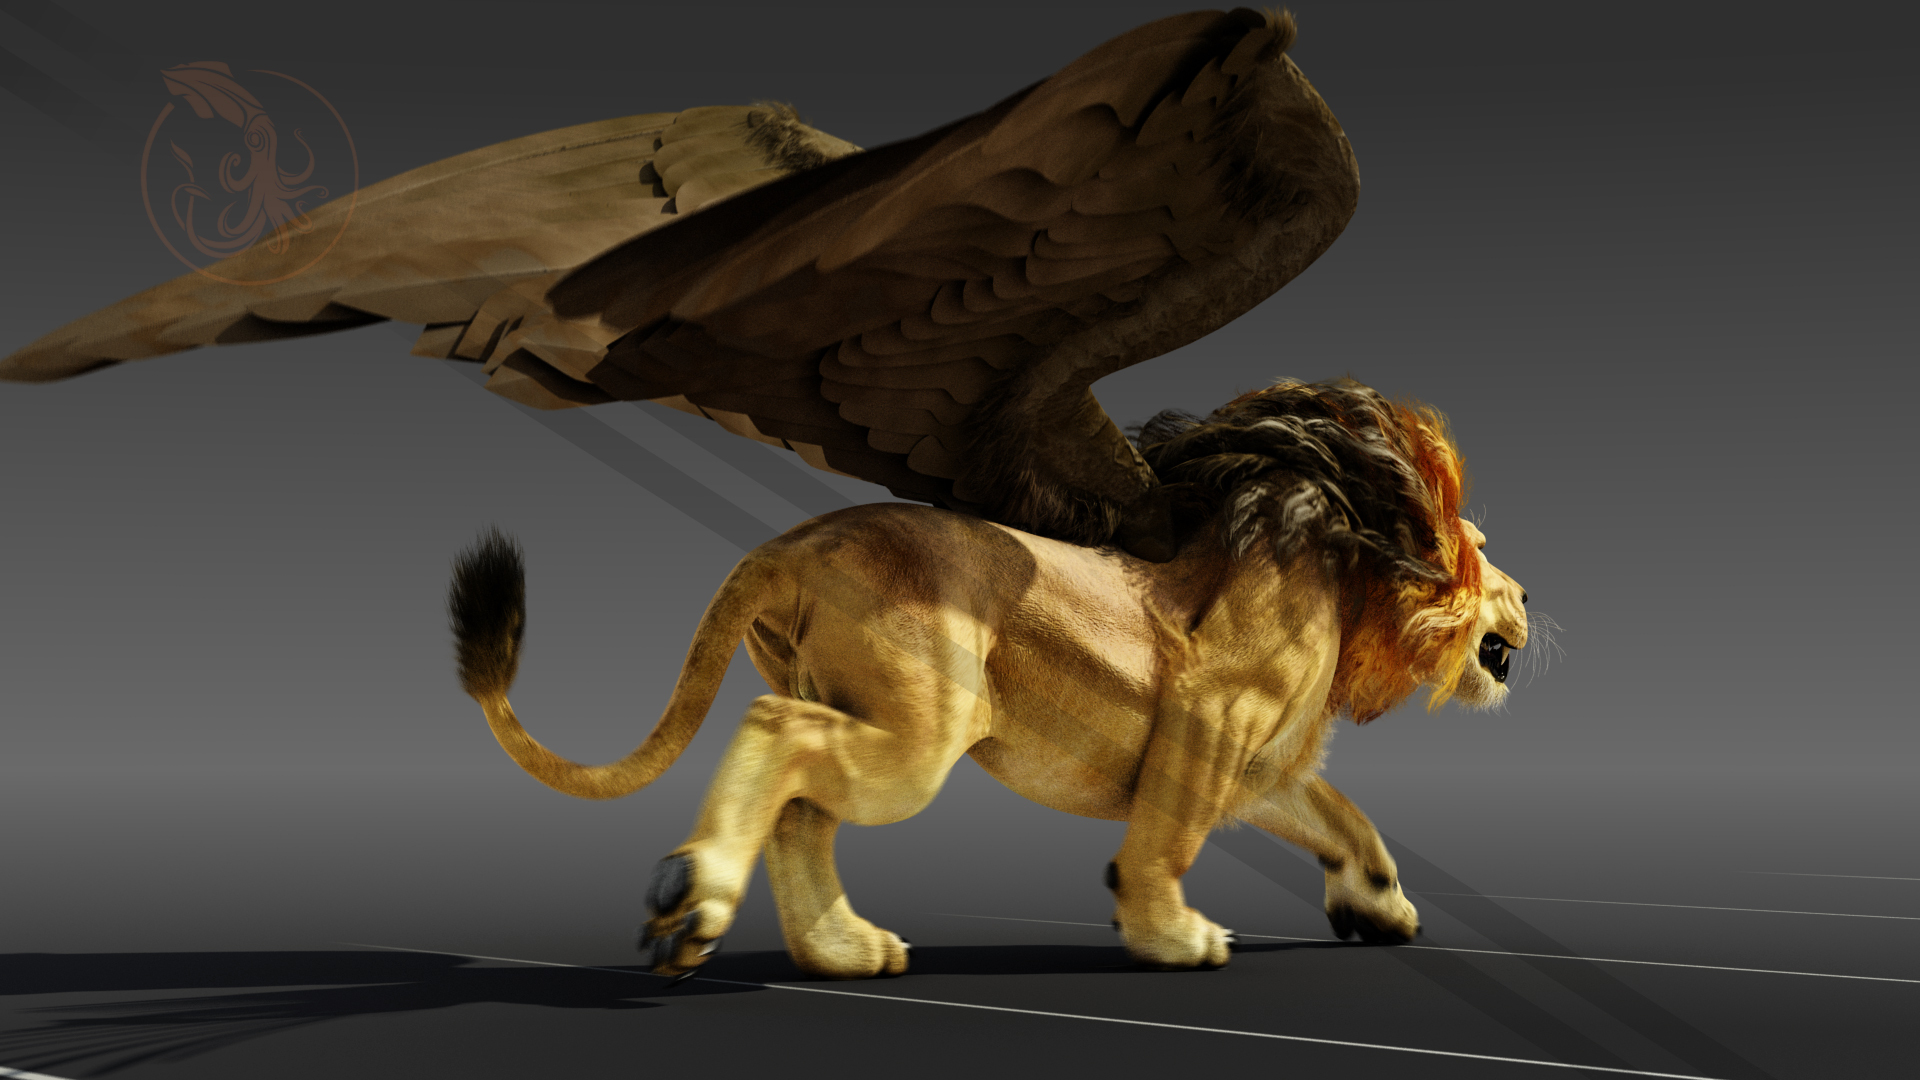 3D winged lion https://p.turbosquid.com/ts-thumb/0c/VOPXp4/nn5pPzn8/colorwingedcyclesw2/jpg/1521379211/1920x1080/turn_fit_q99/2491c8eff44ee151e28ce19b1896c6ac21f6bf73/colorwingedcyclesw2-1.jpg